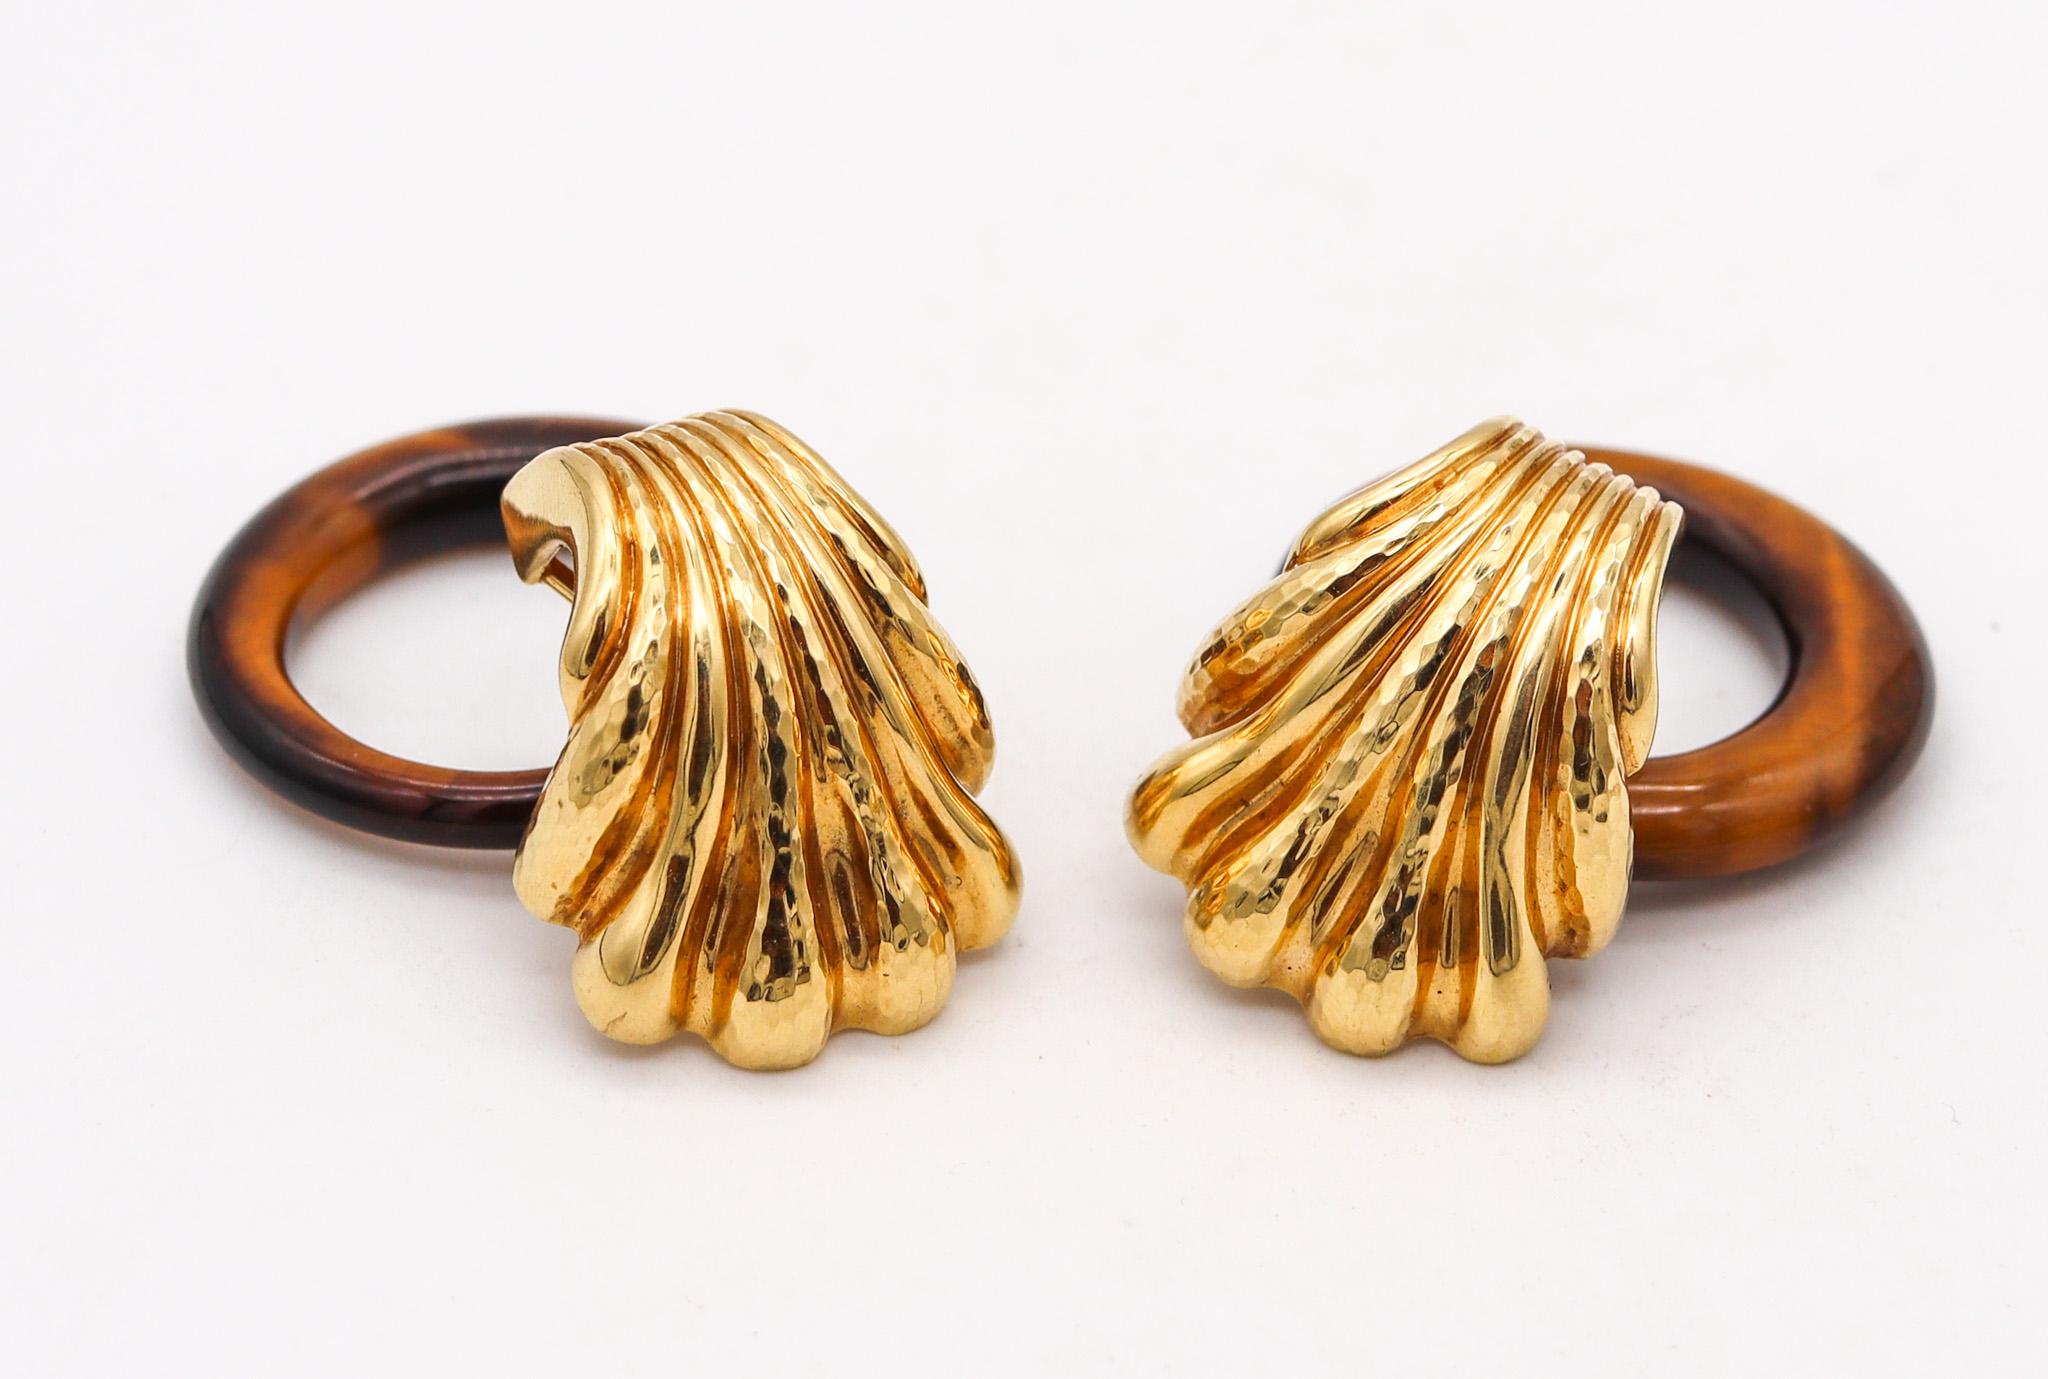 Doorknocker convertible earrings designed by Andrew Clunn.

Gorgeous pair of convertible doorknockers earrings, created in New York city at the jewelry atelier of Andrew Clunn. These earrings has been crafted with fluted patterns in solid rich